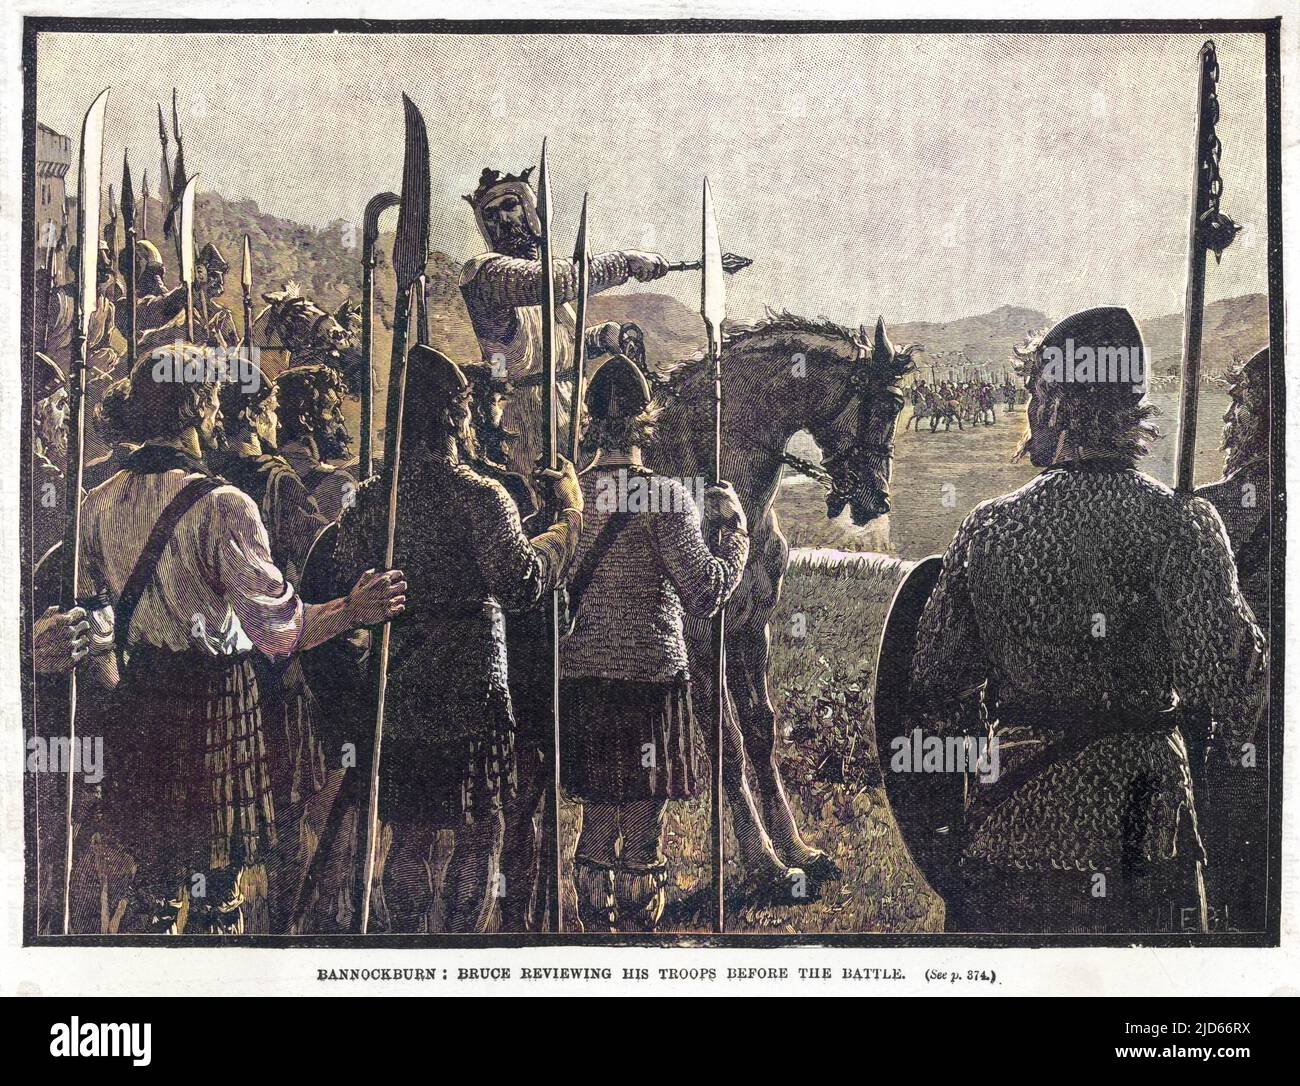 Before the battle, King Robert de Bruce VIII reviews the Scottish army, who proceed to defeat the English Colourised version of : 10011377       Date: 24 June 1314 Stock Photo